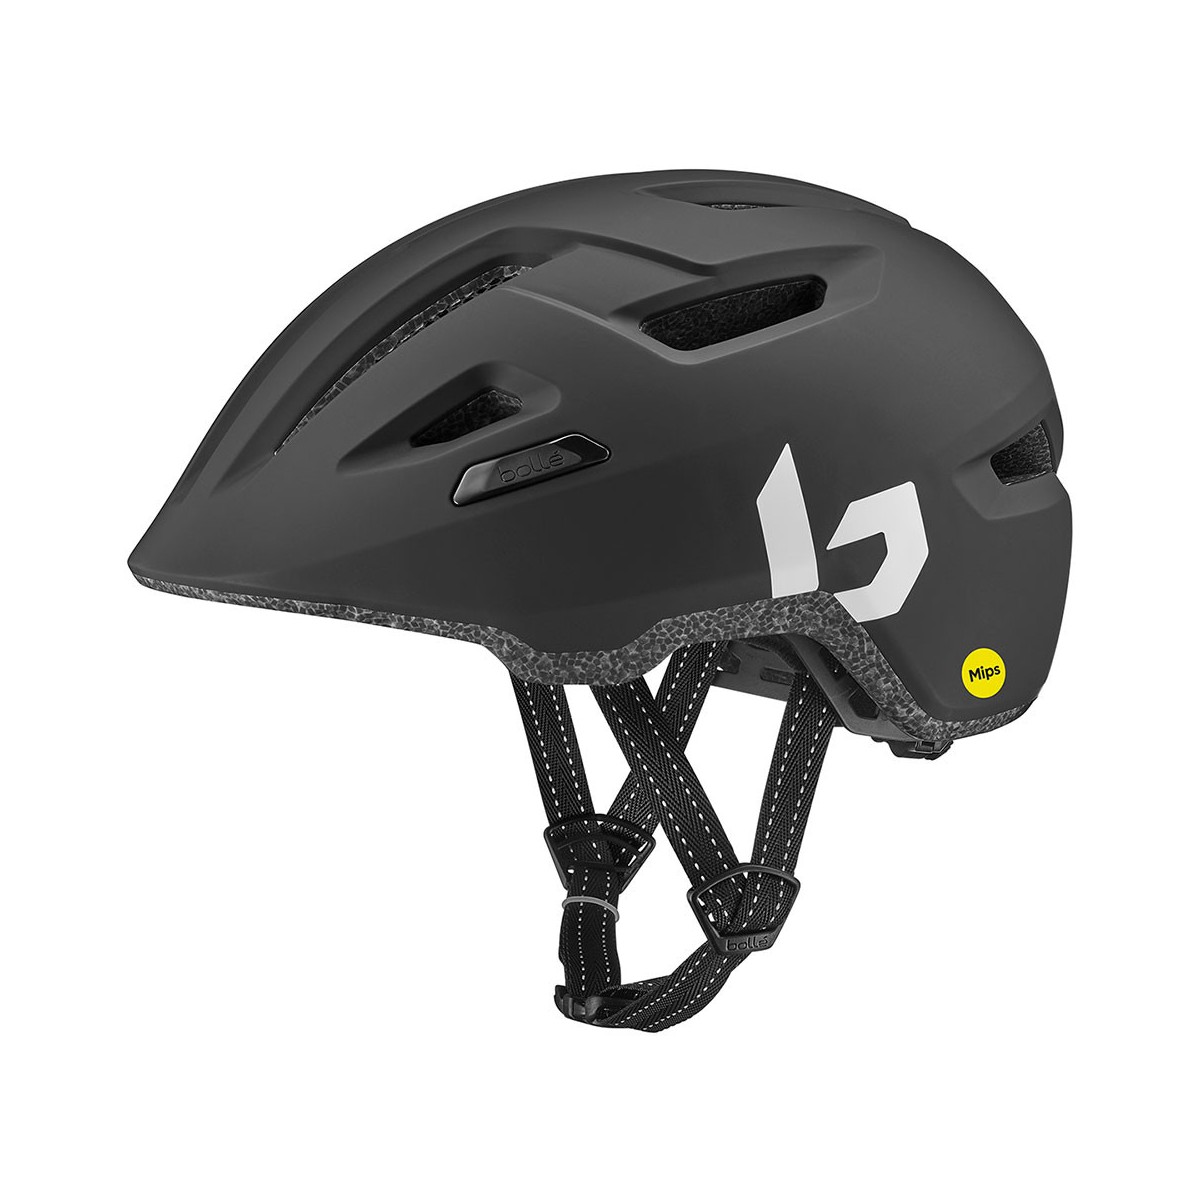 CASCO BOLLE STANCE PURE MIPS (NEGRO MATE)